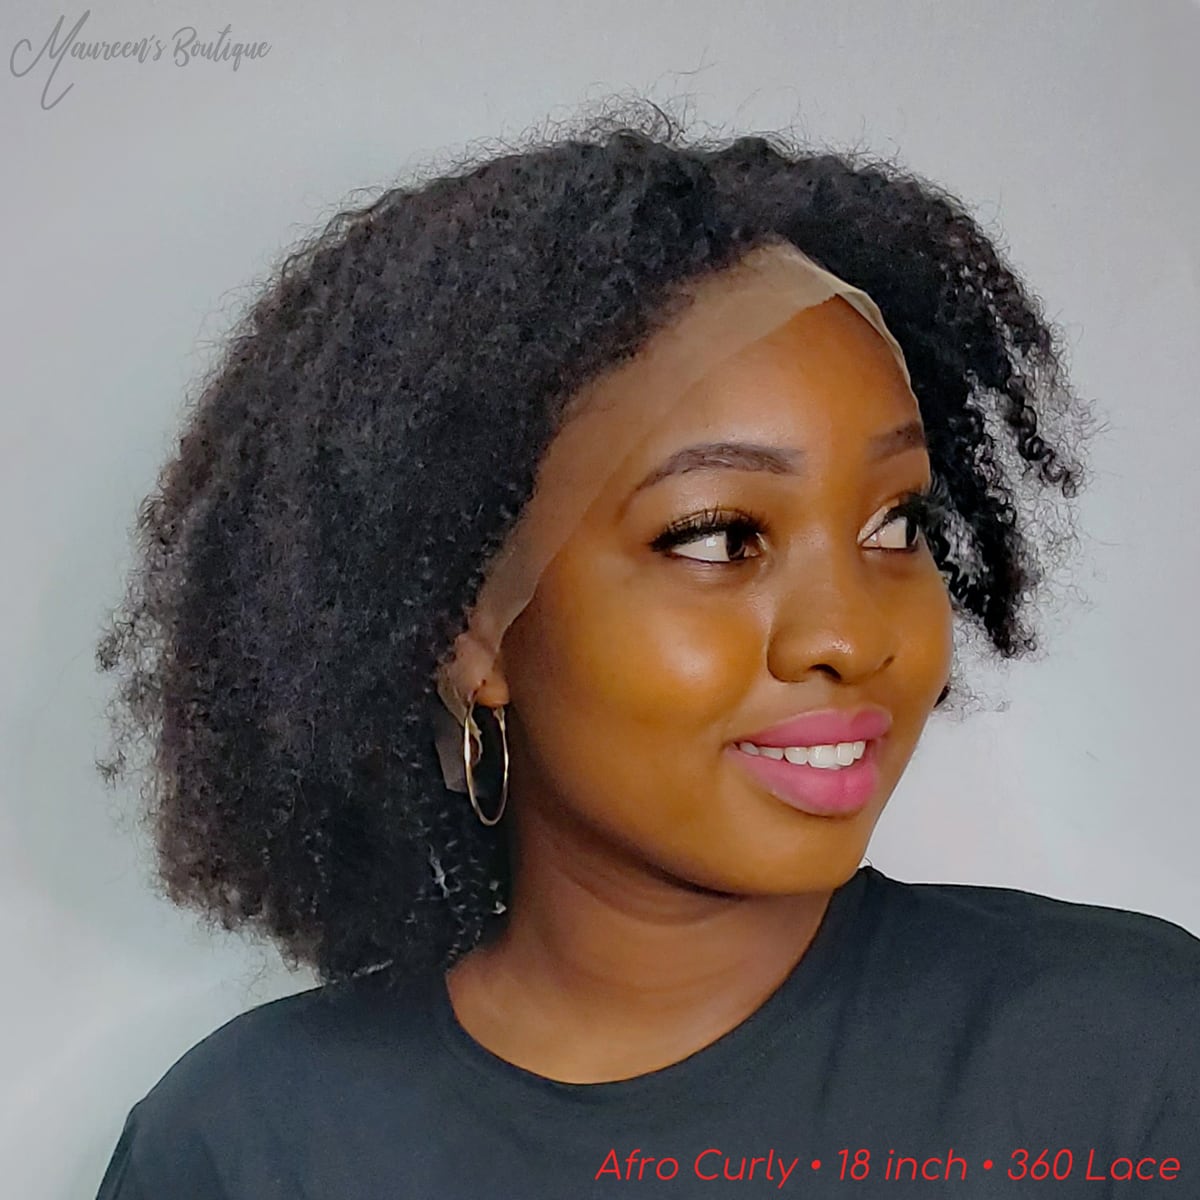 Afro Curly human hair wig on model 3